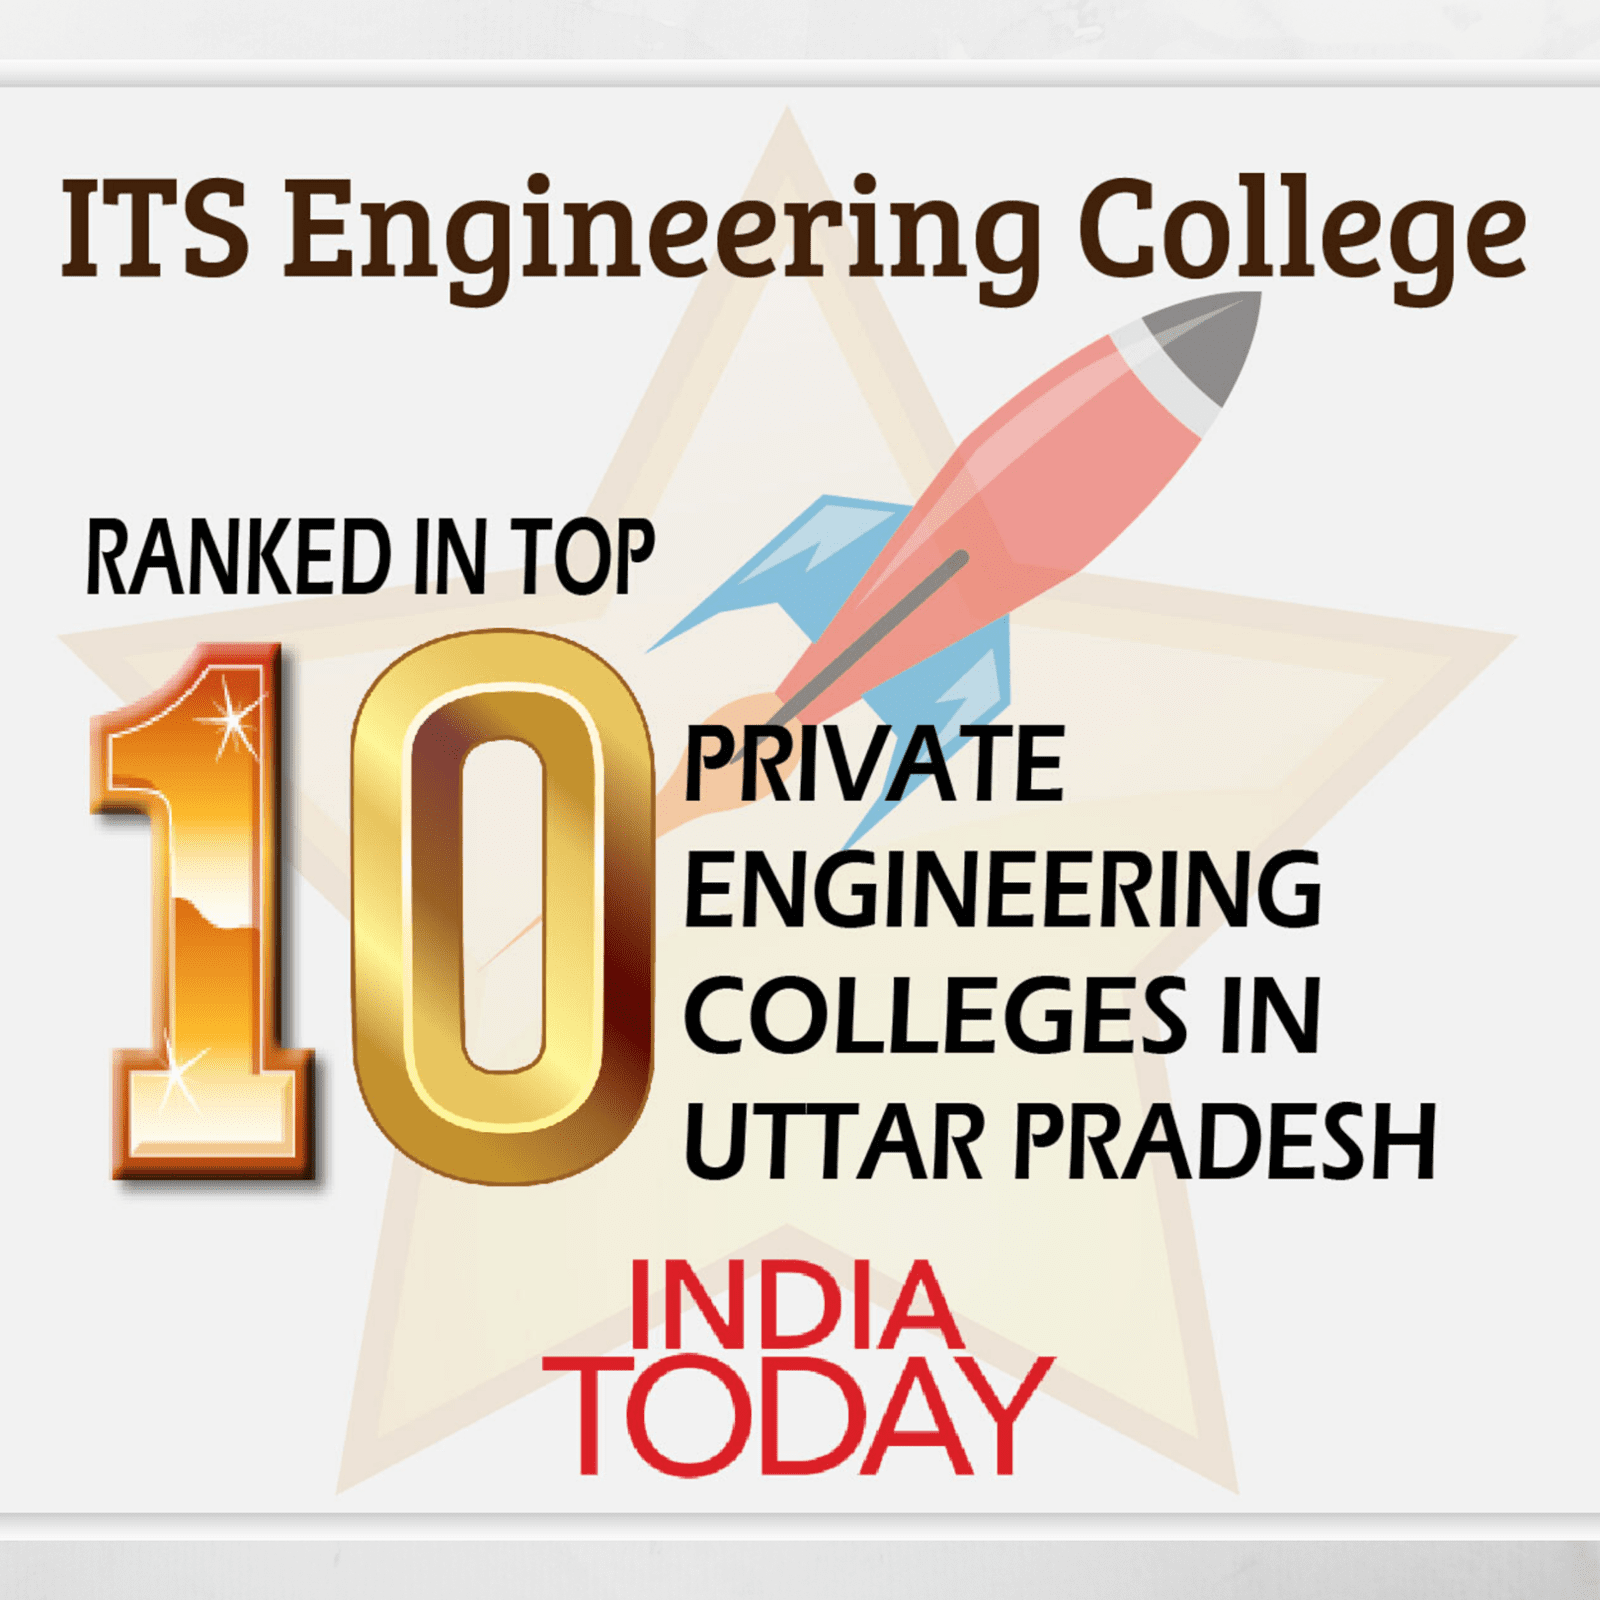 ITS in Top 10 Private Engineering College by India Today